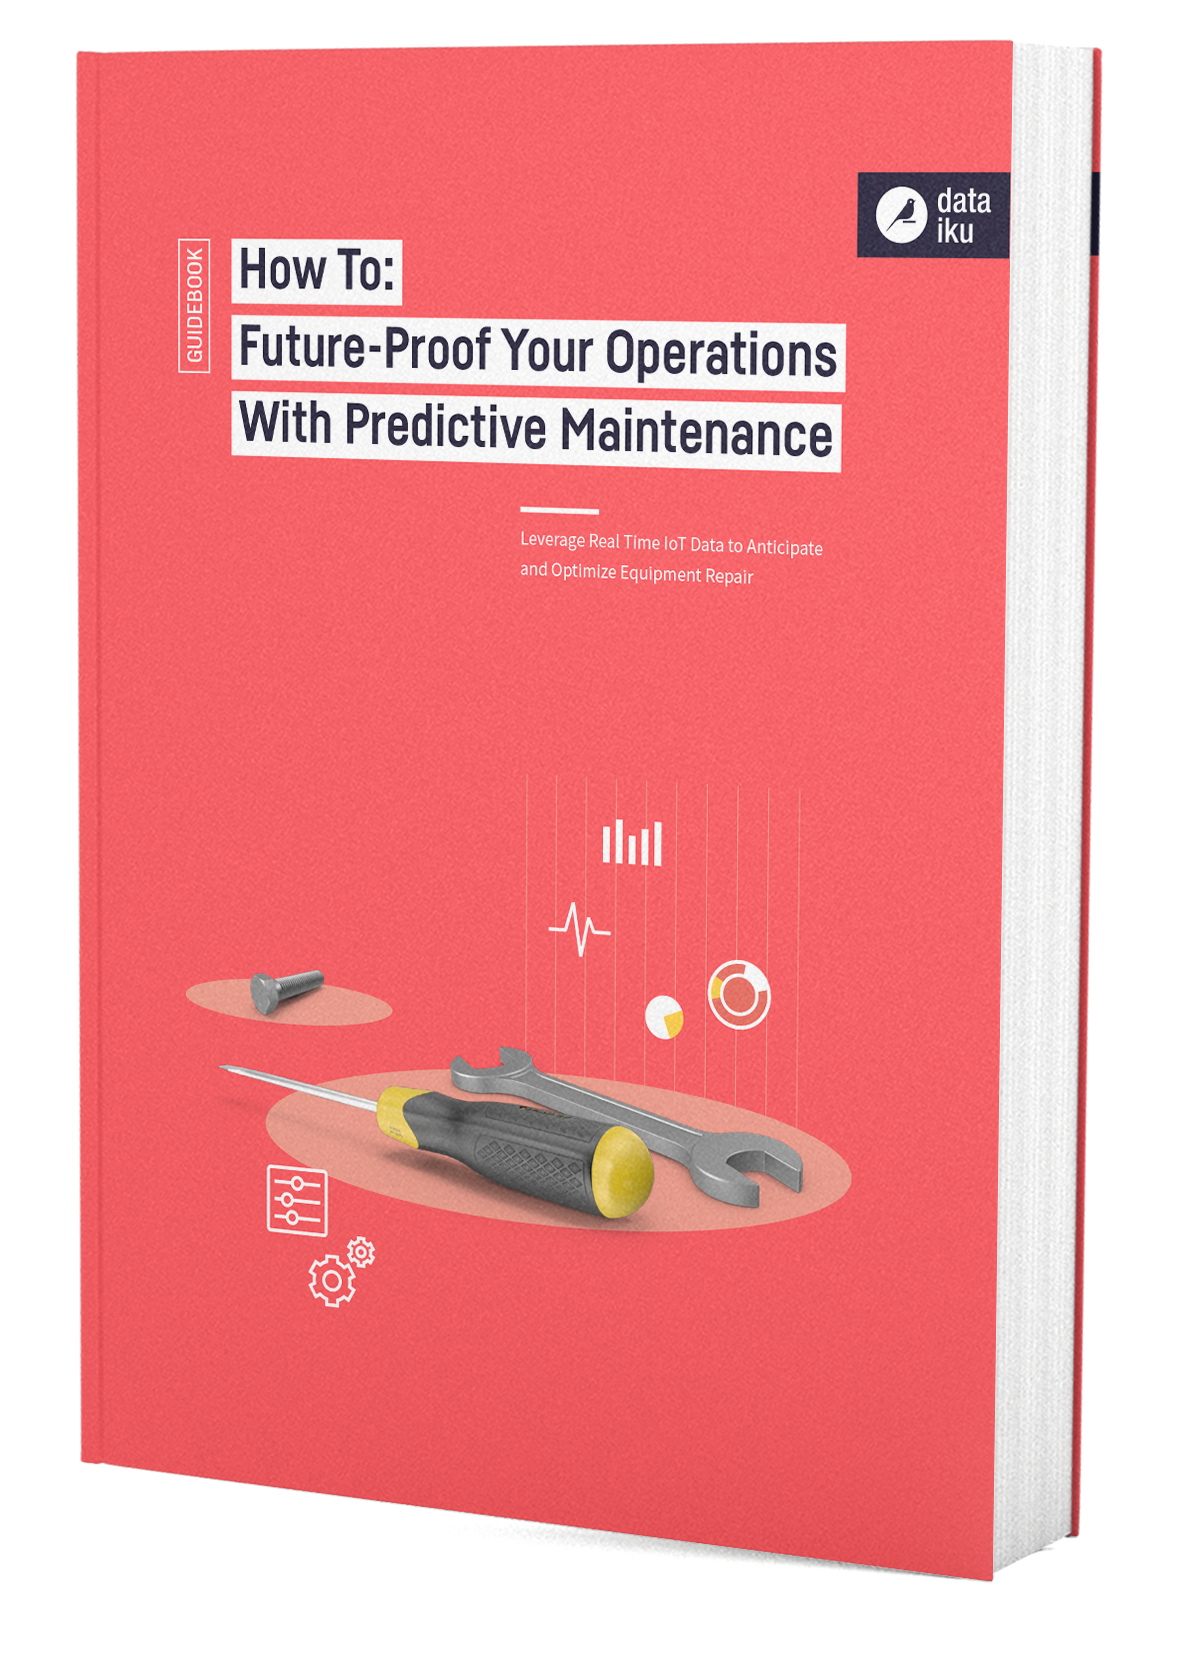 DKU-DATAIKU-EBOOK_COVER-WEB-HOW_TO_FUTURE_PROOF_YOUR_OPERATIONS_WITH_PREDICTIVE_MAINTENANCE-BAT_210519